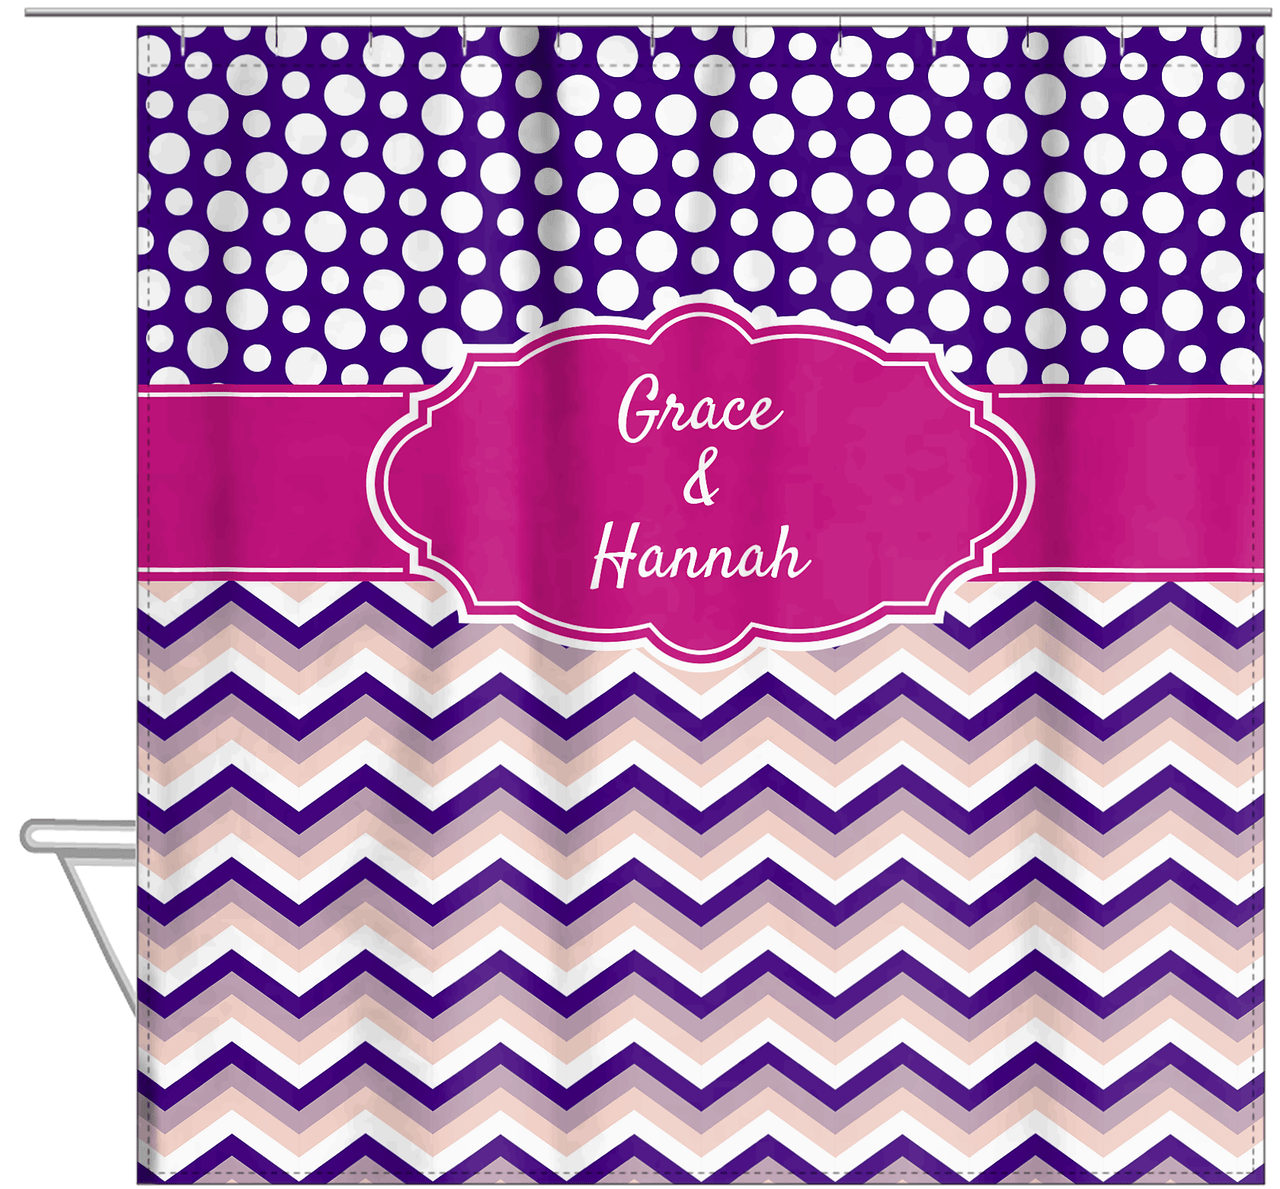 Personalized Polka Dots and Chevron IV Shower Curtain - Pink and Purple - Fancy Nameplate II - Hanging View